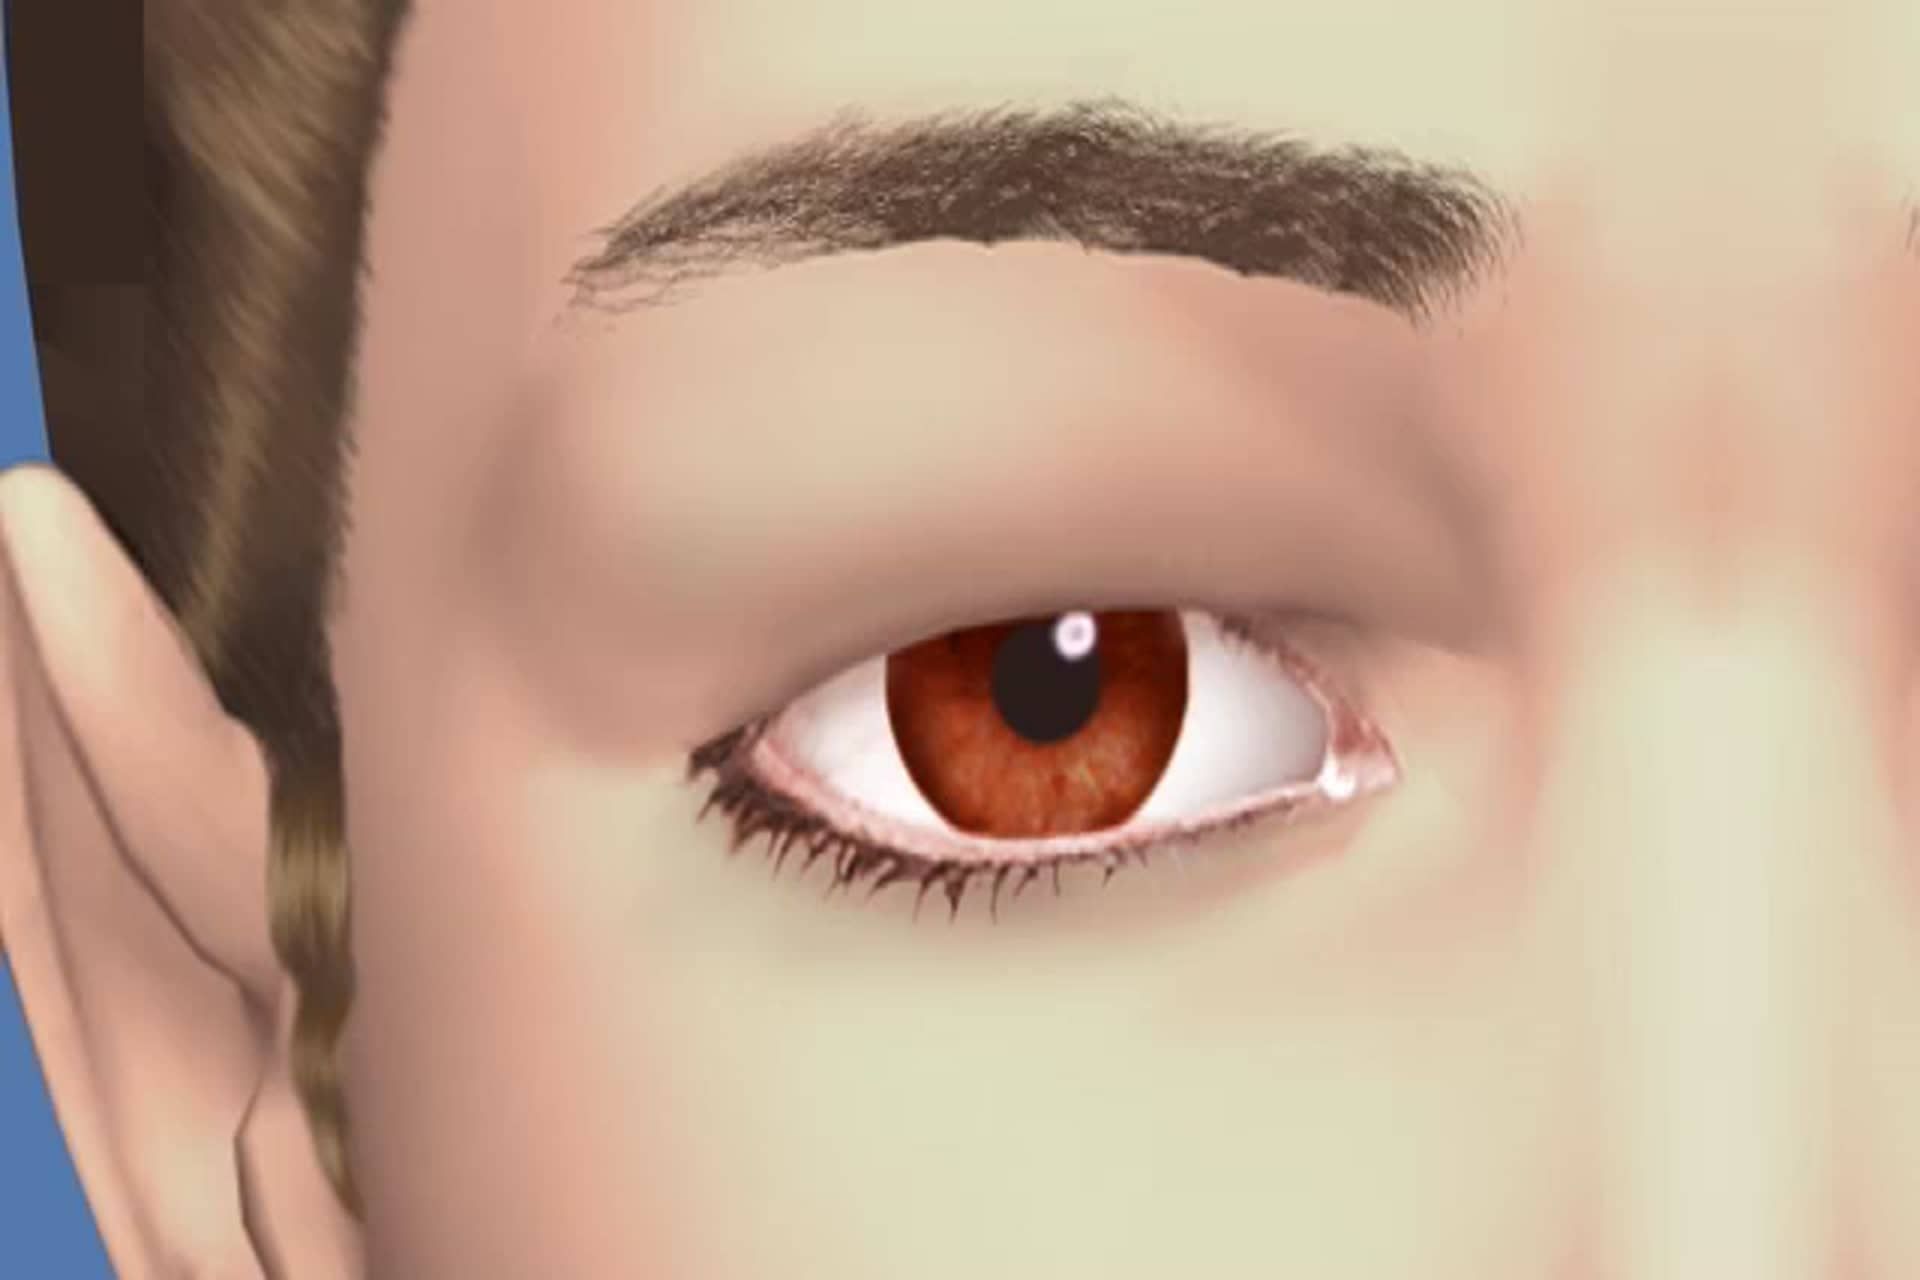 Eyelid - What causes drooping of the eyelids?